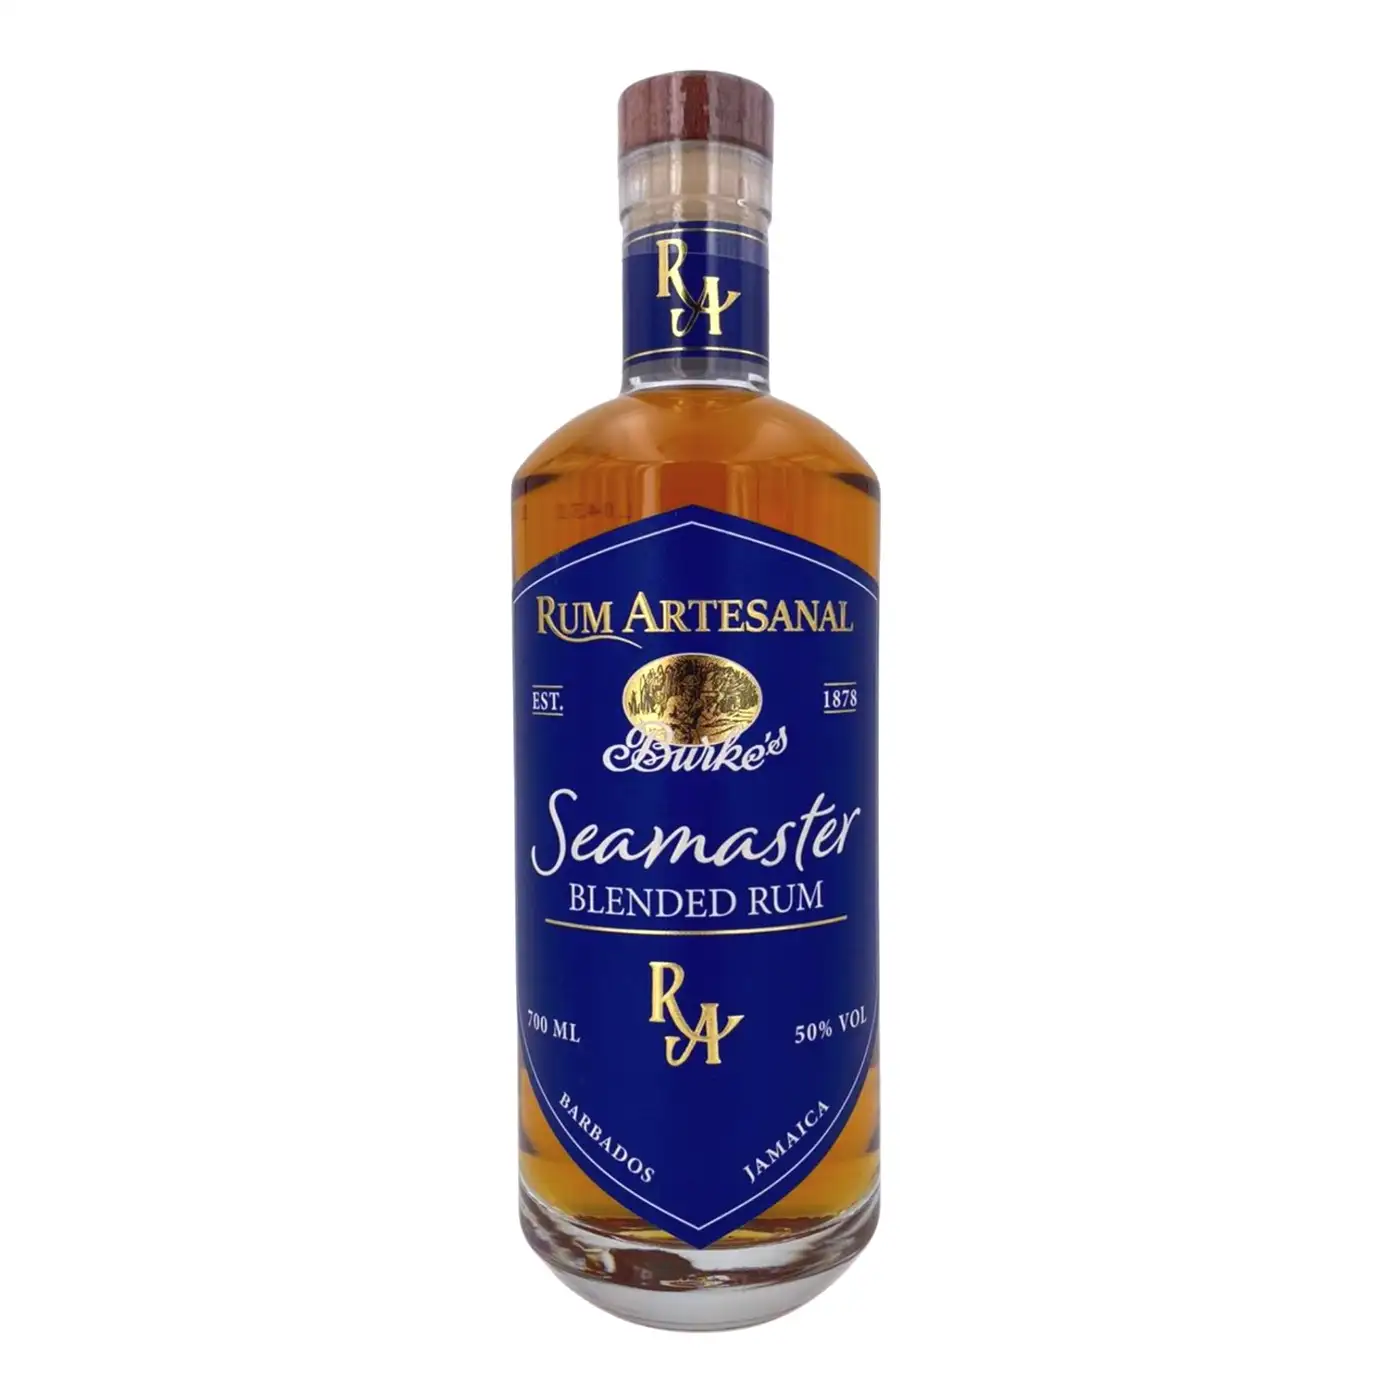 Image of the front of the bottle of the rum Rum Artesanal Burke‘s Seamaster Blended Rum